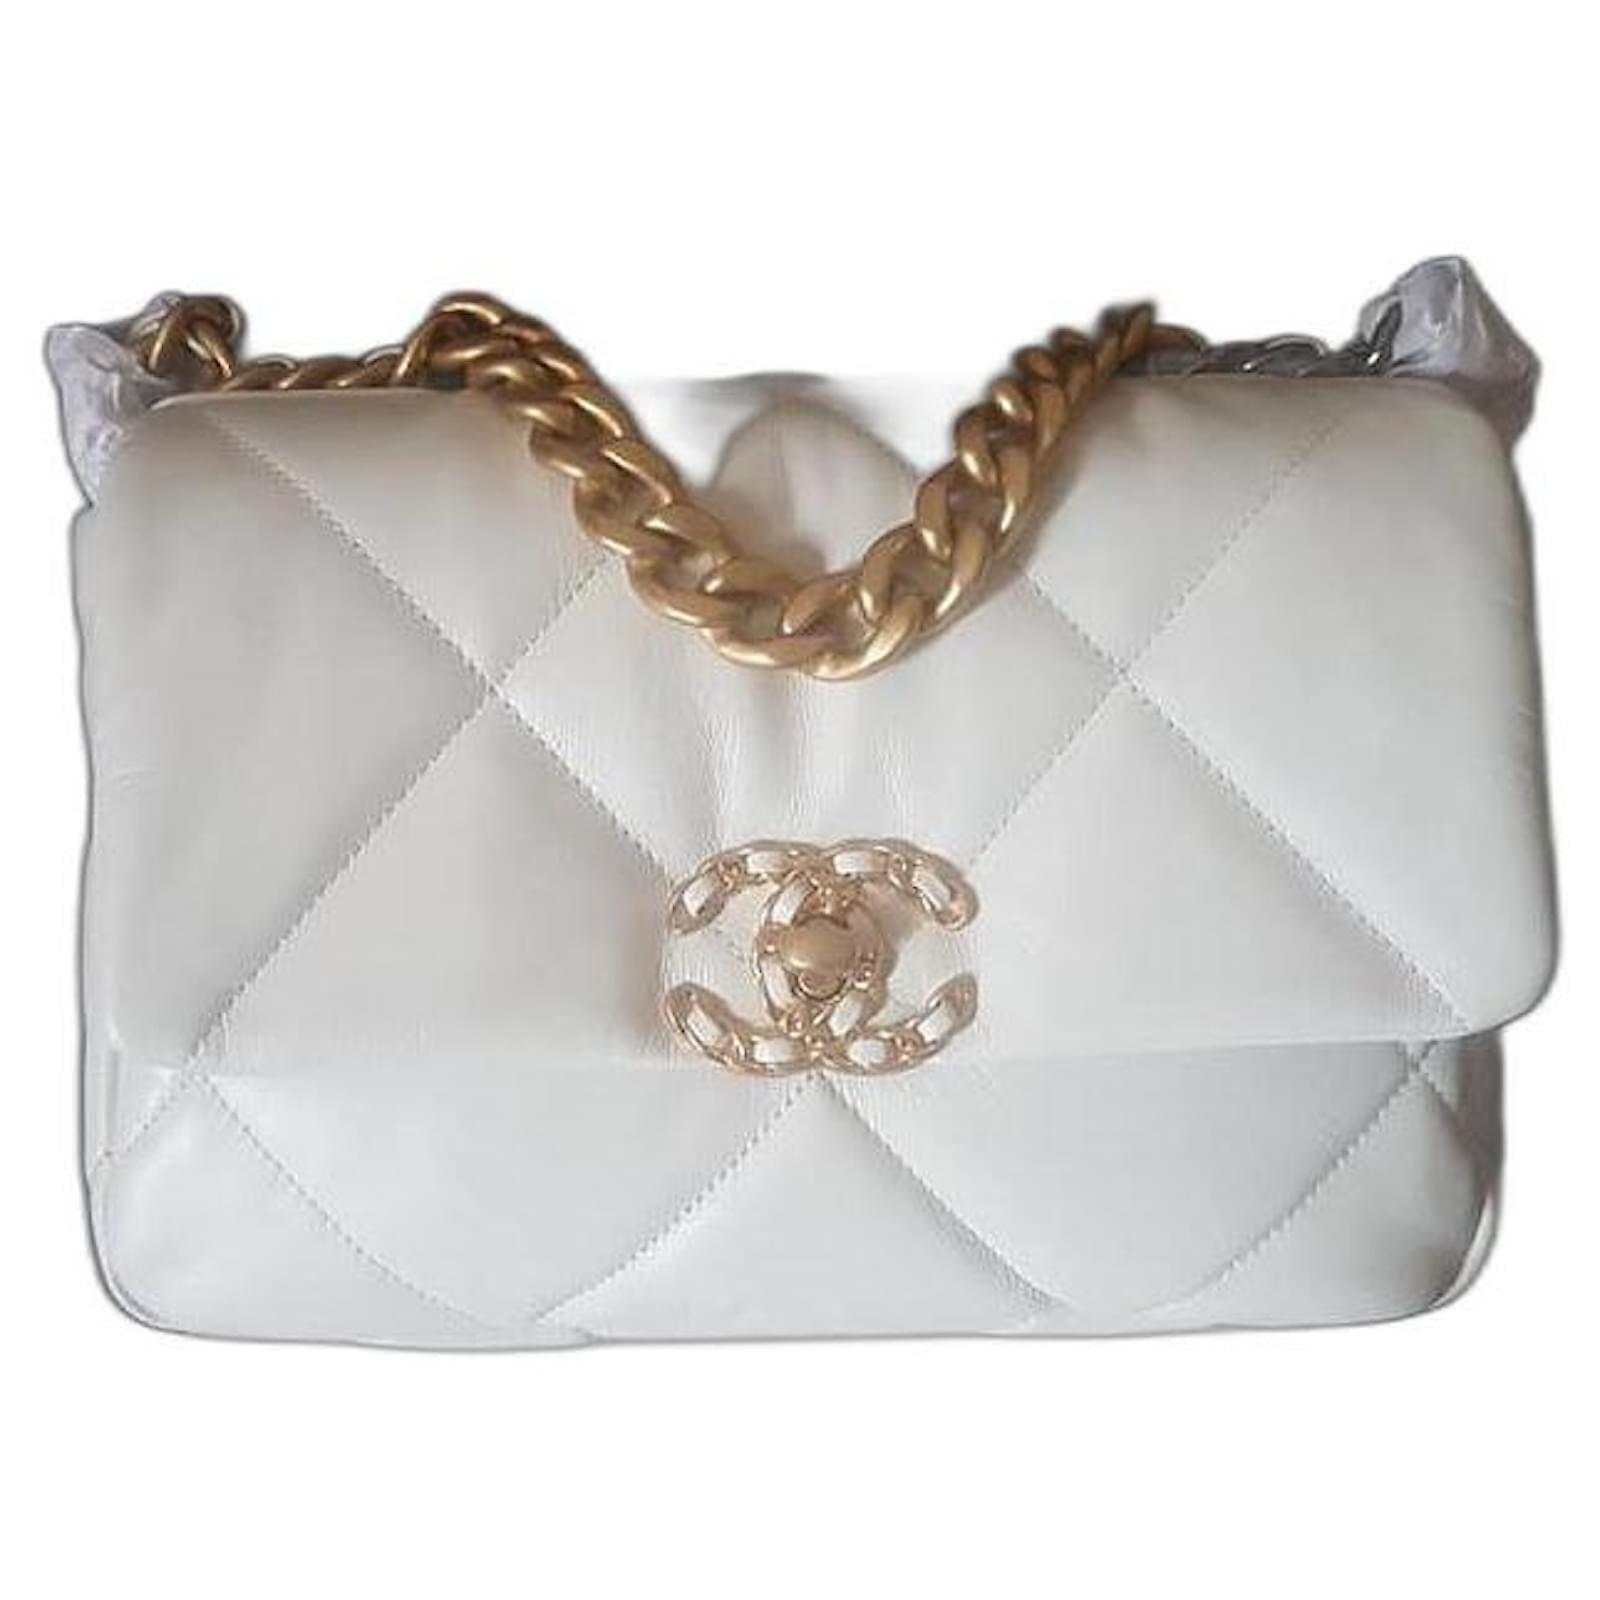 Chanel 19 Medium (Small), White Lambskin Leather, Mixed Hardware, New in Box